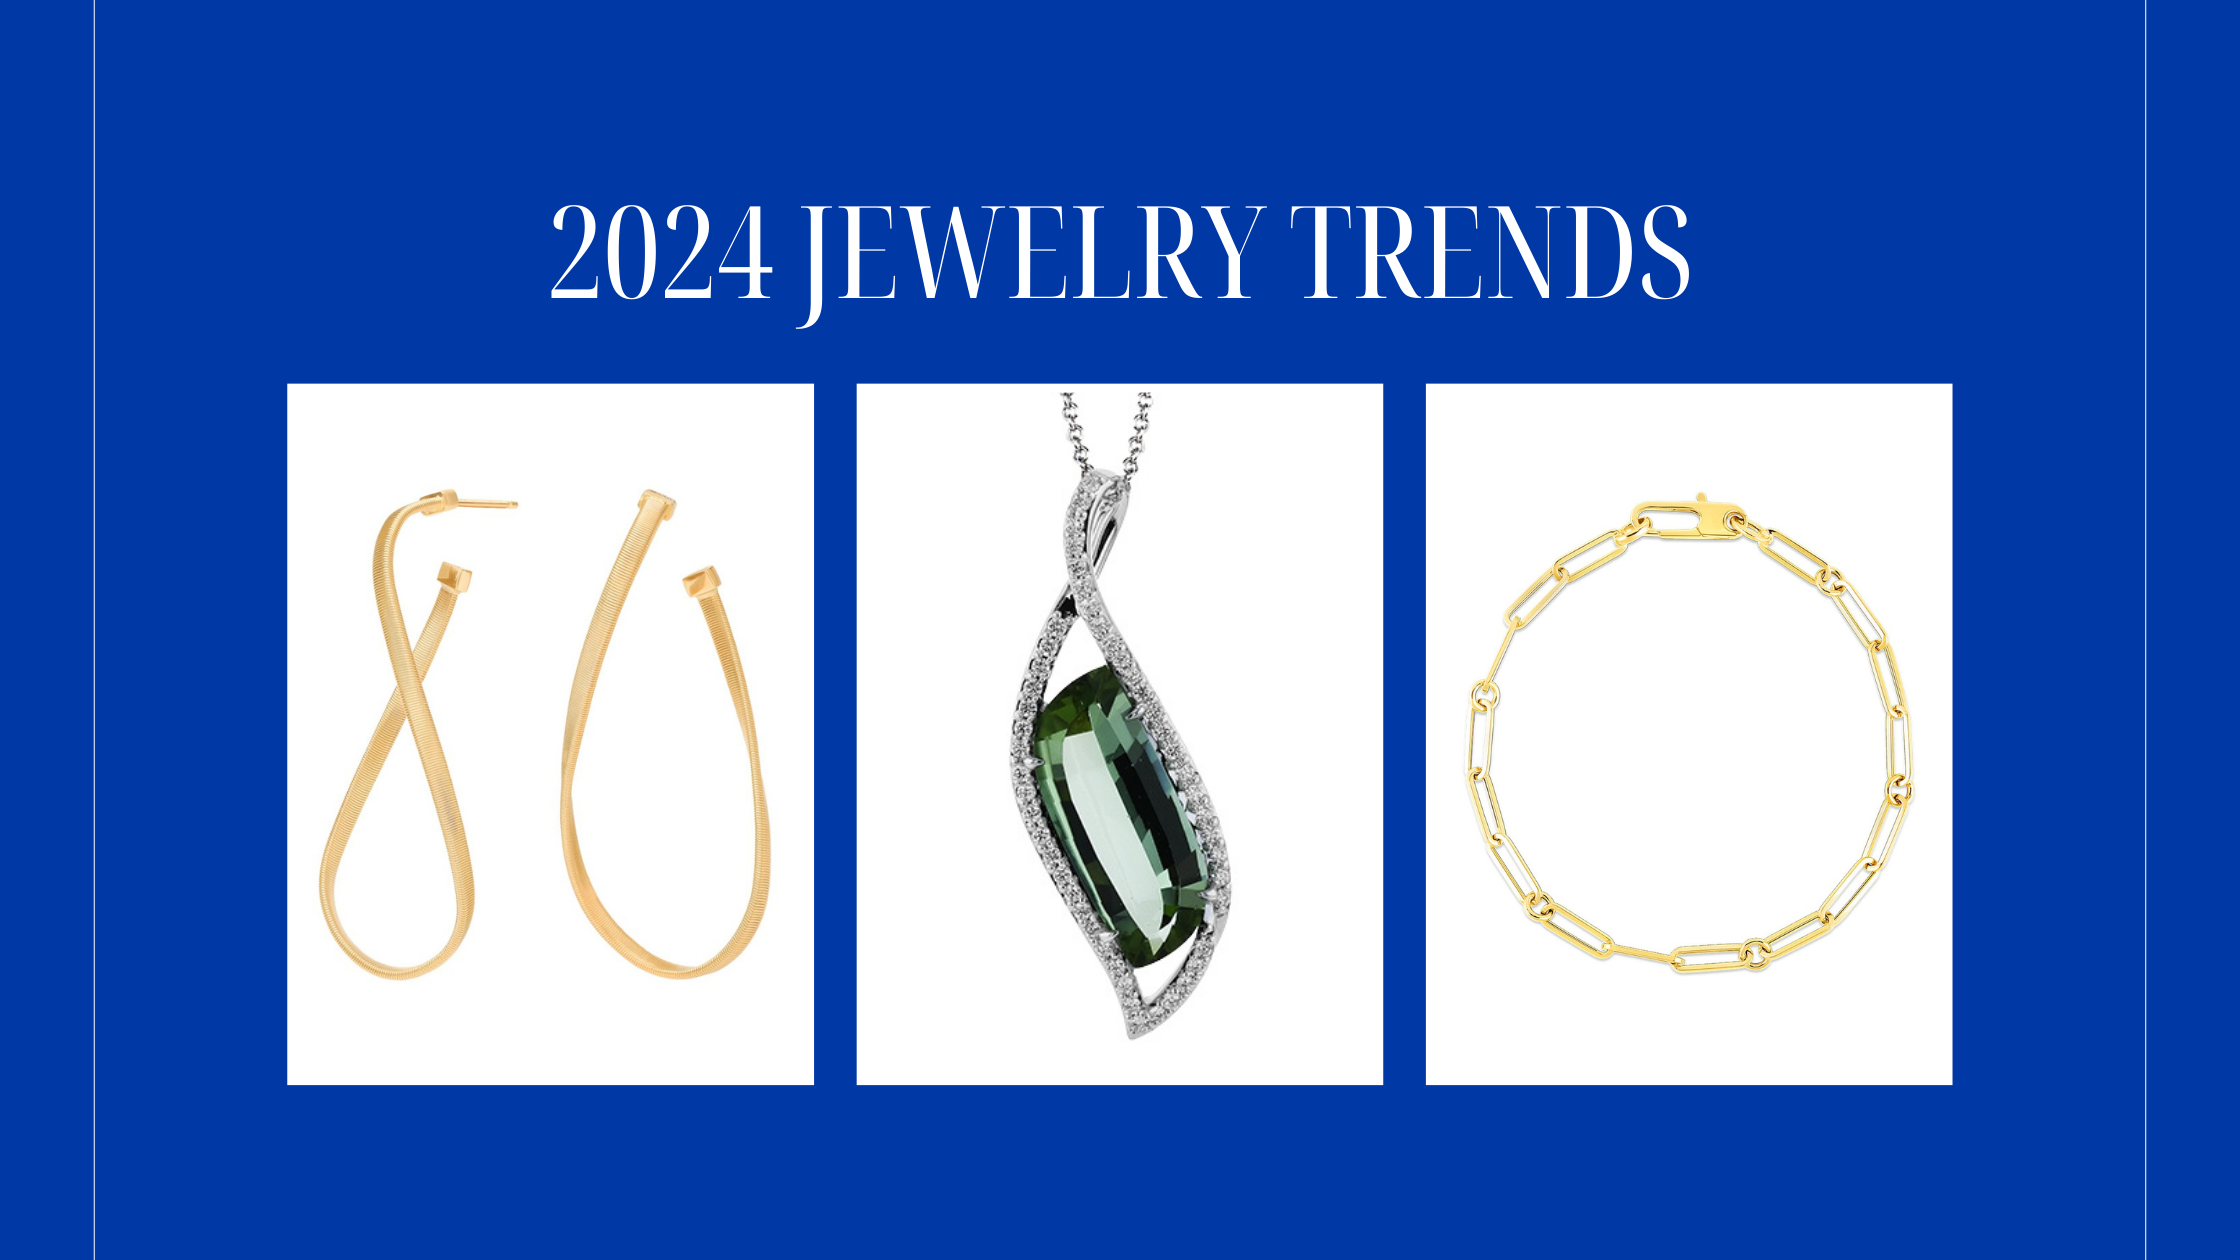 New Jersey’s Top 6 Jewelry Trends for 2024